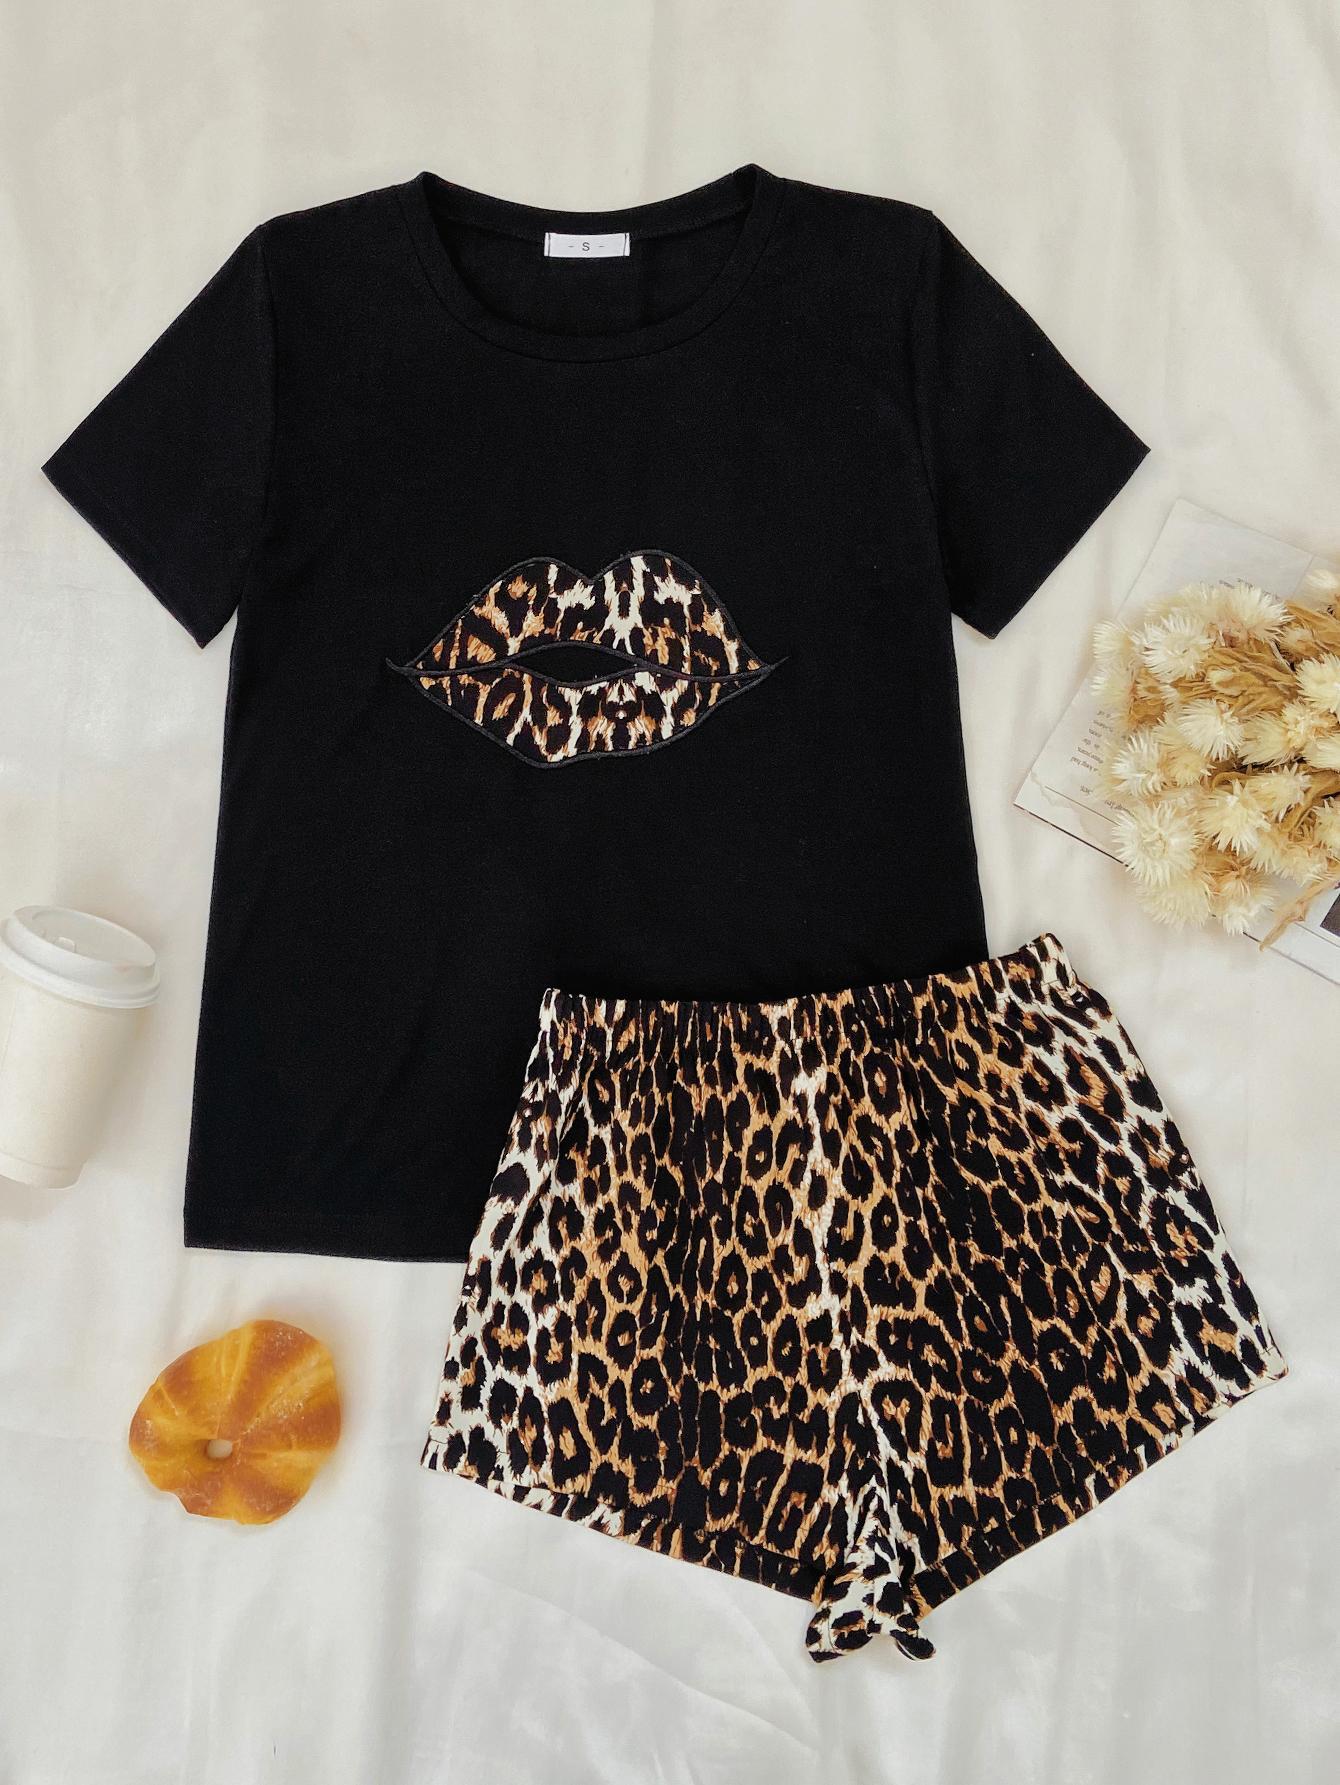 Leopard Lip Graphic Top and Shorts Lounge Set - Tophatter Deals and Online Shopping - Electronics, Jewelry, Beauty, Health, Gadgets, Fashion - Tophatter's Discounts & Offers - tophatters